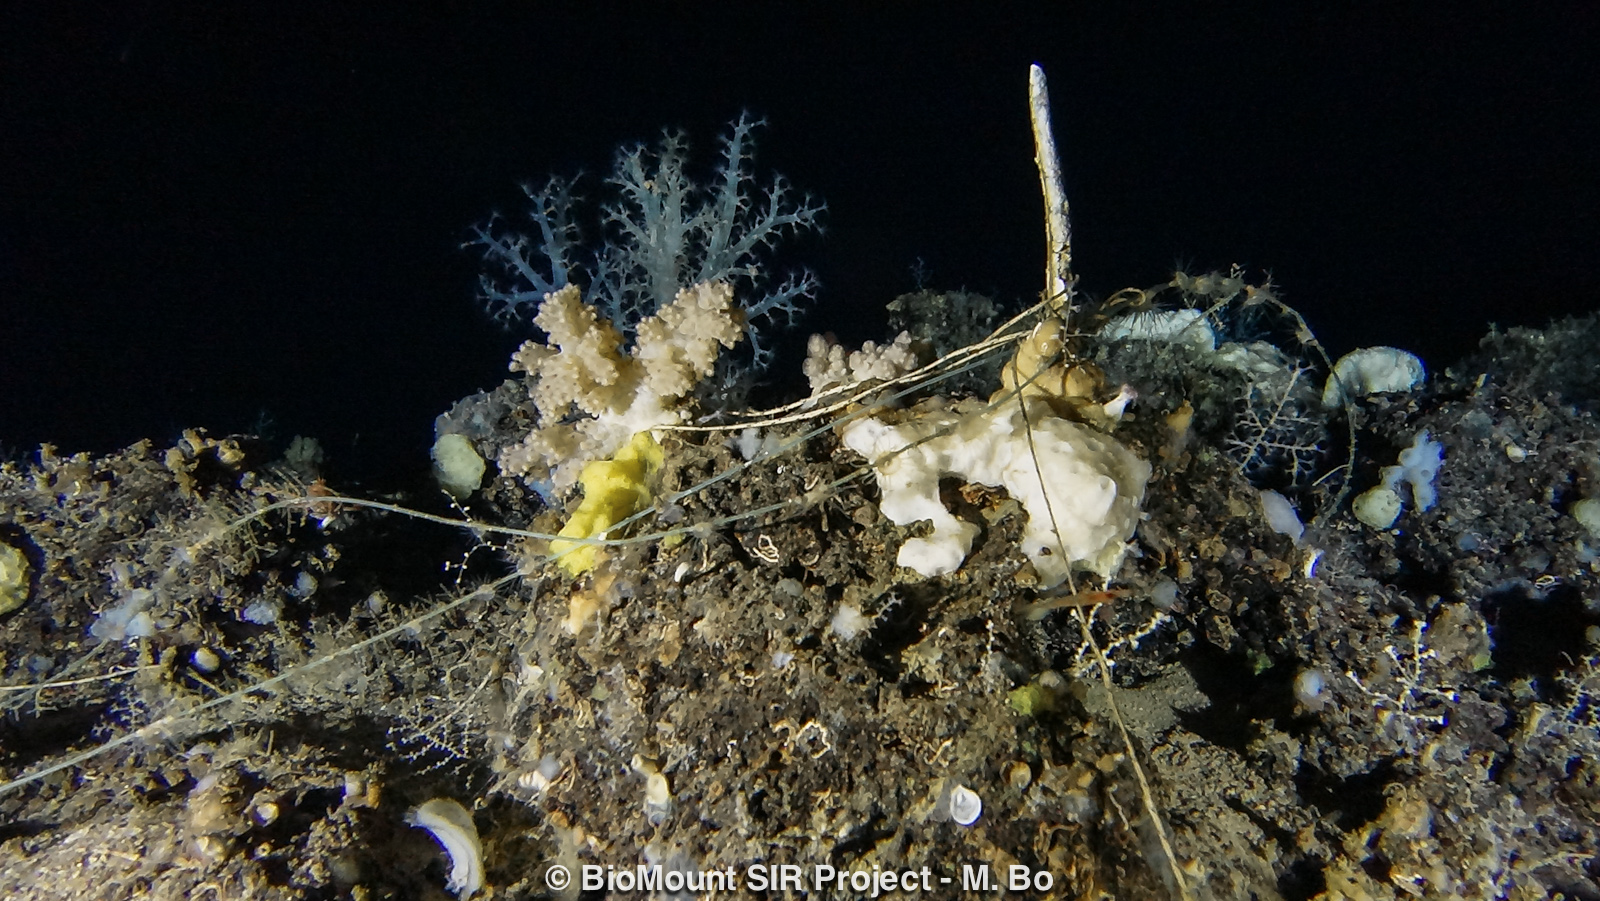 Benthic assemblage entangled by lines.